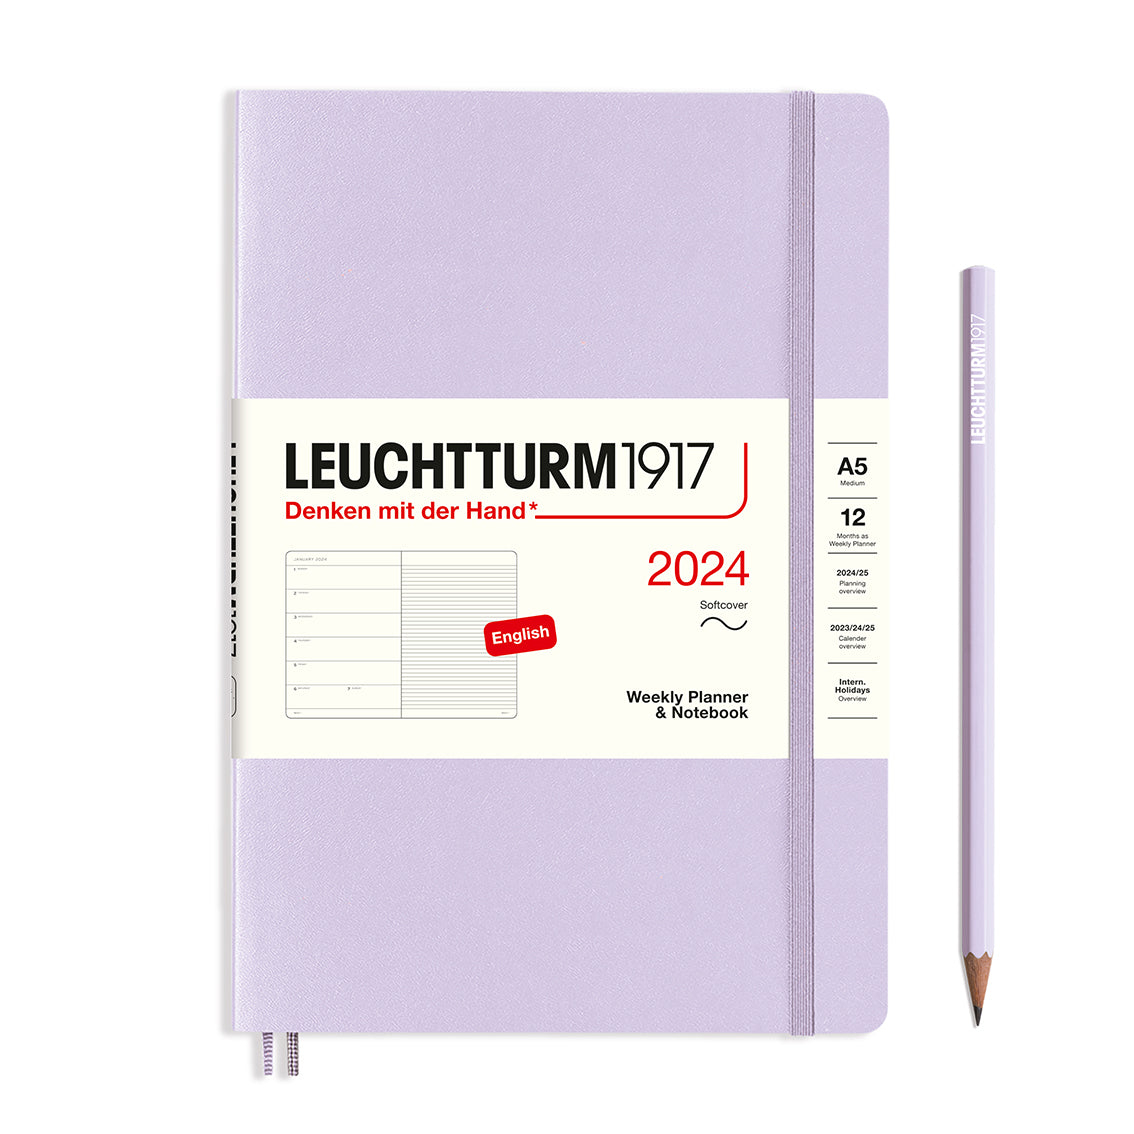 An image of a lilac planner with a lilac elastic band holding it together and a cream paper wrap around the middle stating the business name Leuchtturm1917, that it is for the year 2024, it is a weekly planner and notebook, is A5 in size and an English language version. It has an image on the wrap showing the inside layout which is a week on the left hand page and a notes page on thr right hand page. A lilac pencil is shown at the side of the planner.